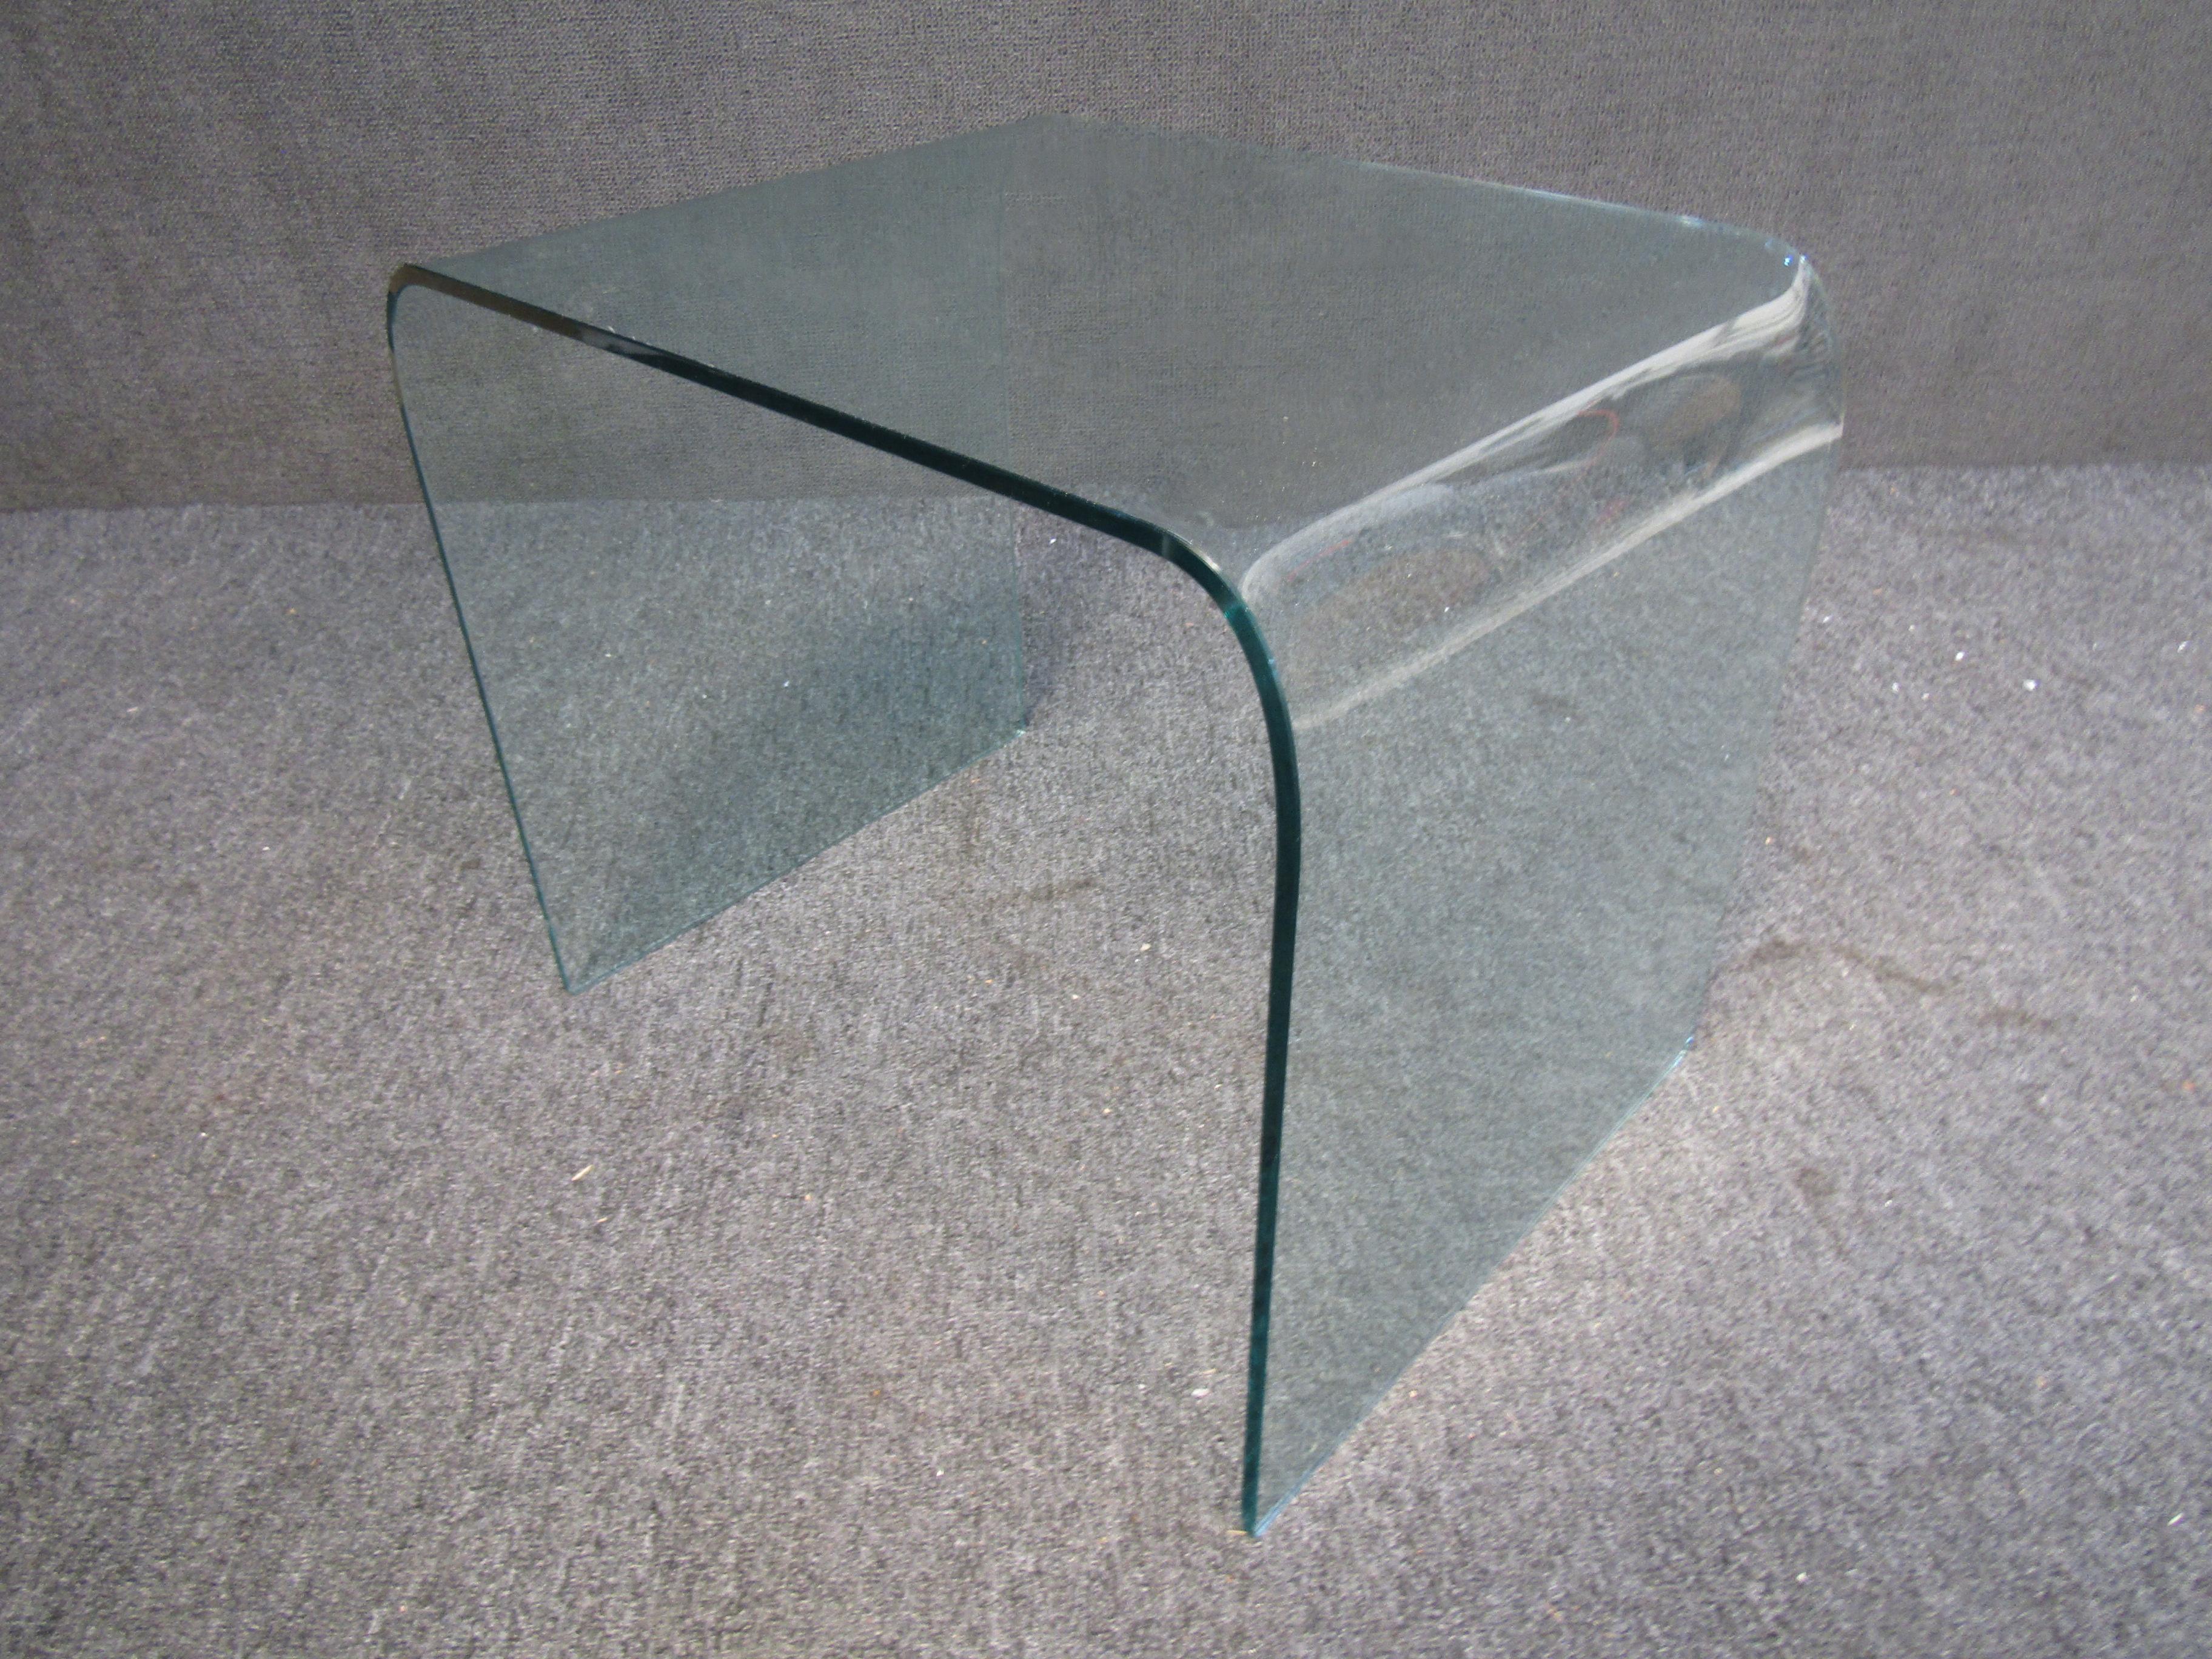 This elegant curved glass side table will make a great addition to any living room set. Simple one piece design is sure to be a topic of conversation.
Please confirm item location with seller (NY/NJ).